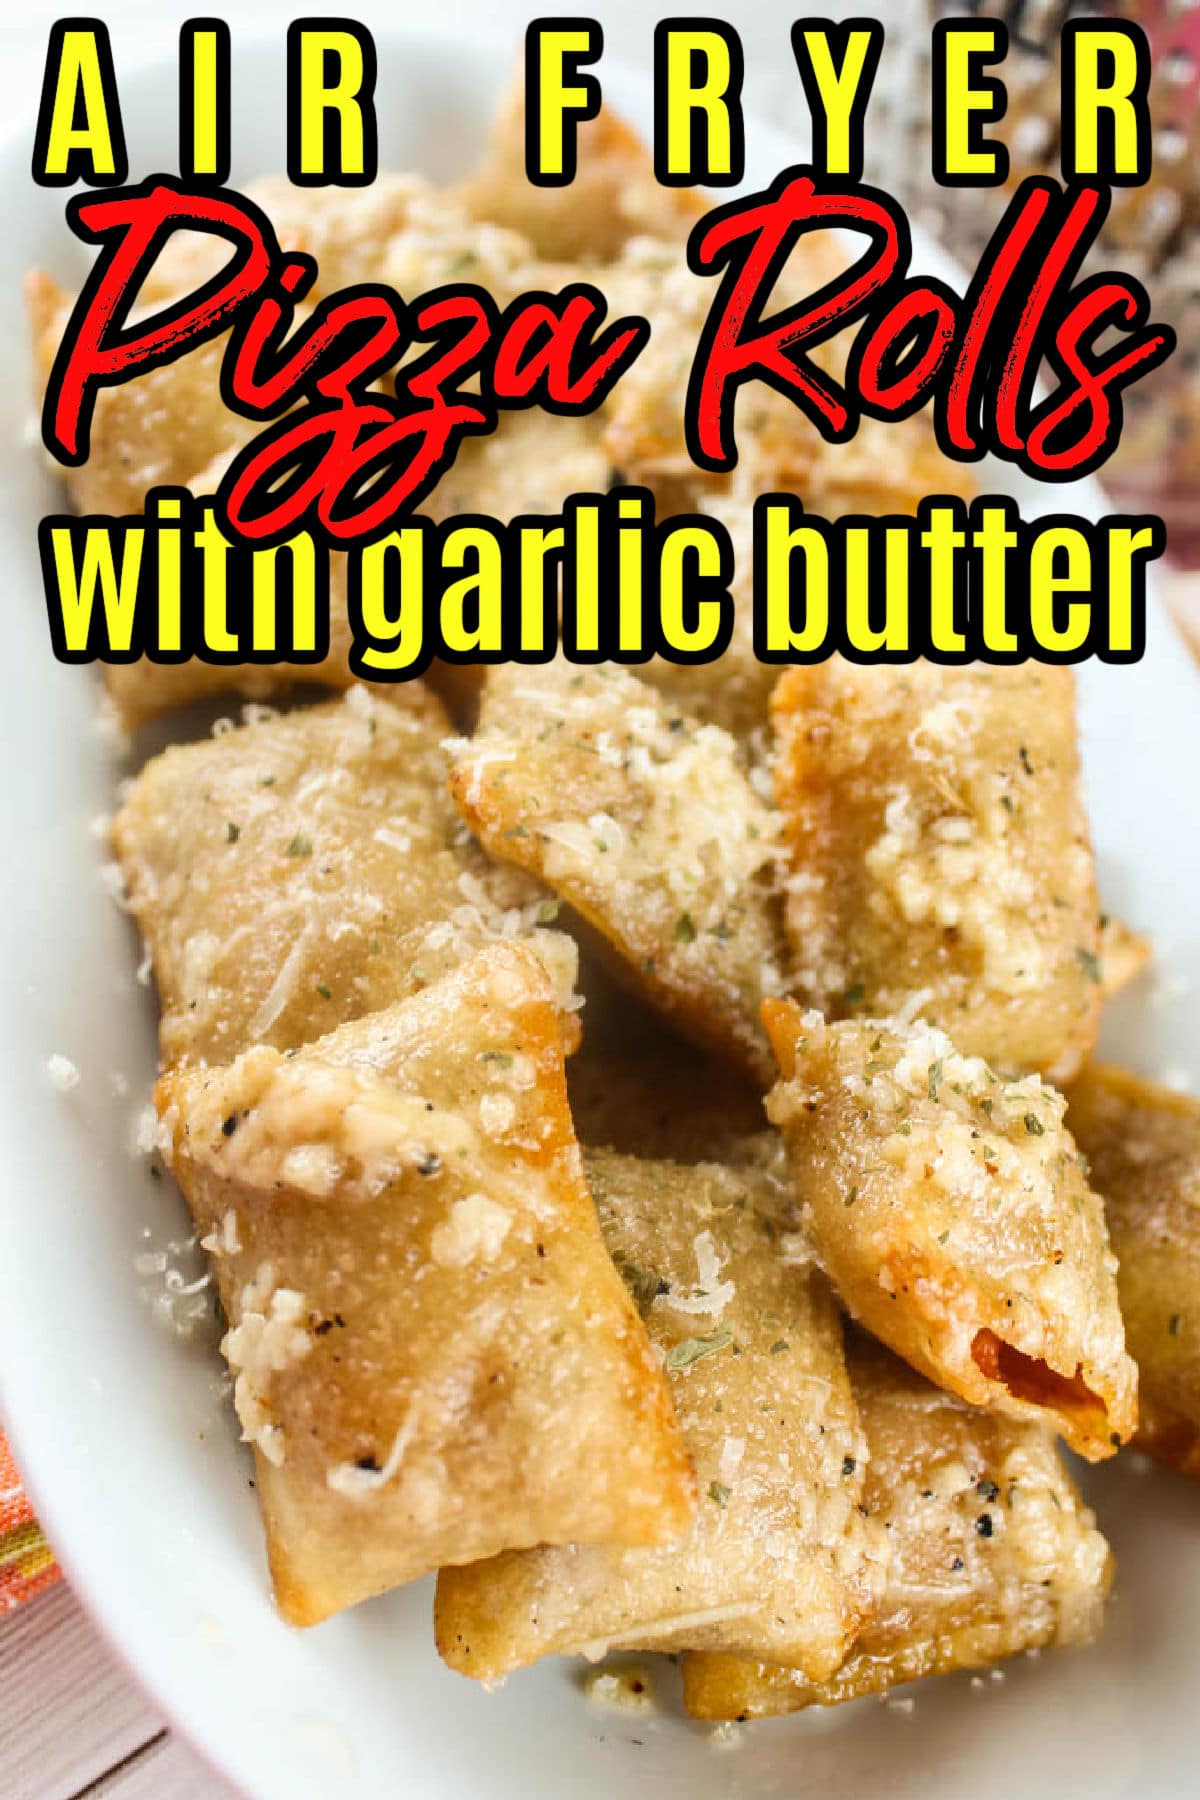 Pizza rolls in the air fryer are a game changer when it comes to snack foods! I took these pizza rolls and knocked them out of the park by tossing them in garlic parmesan butter! (I saw it on the Instagram!)  via @foodhussy